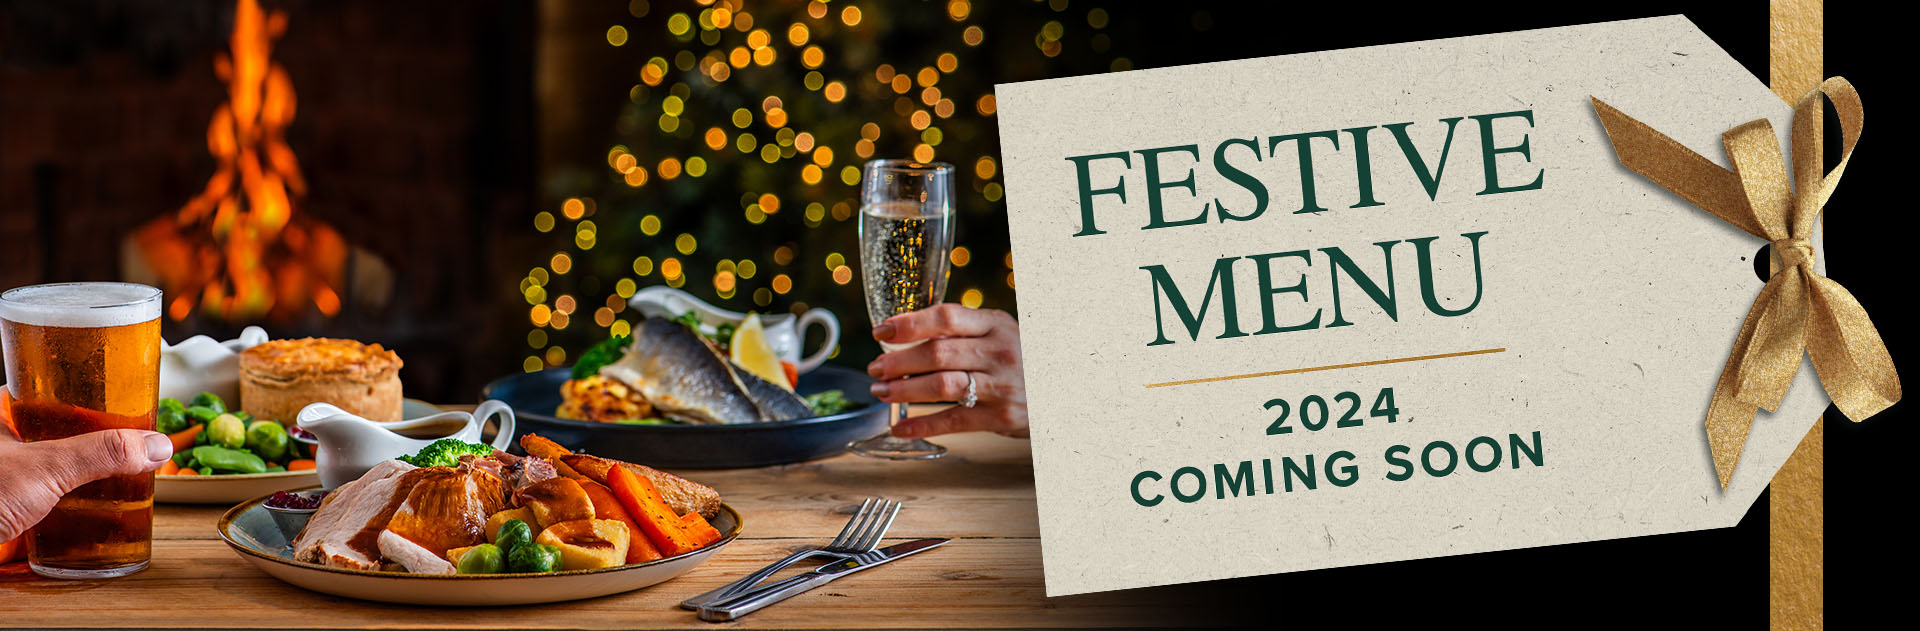 Festive Menu at Red Lion, Walsgrave 